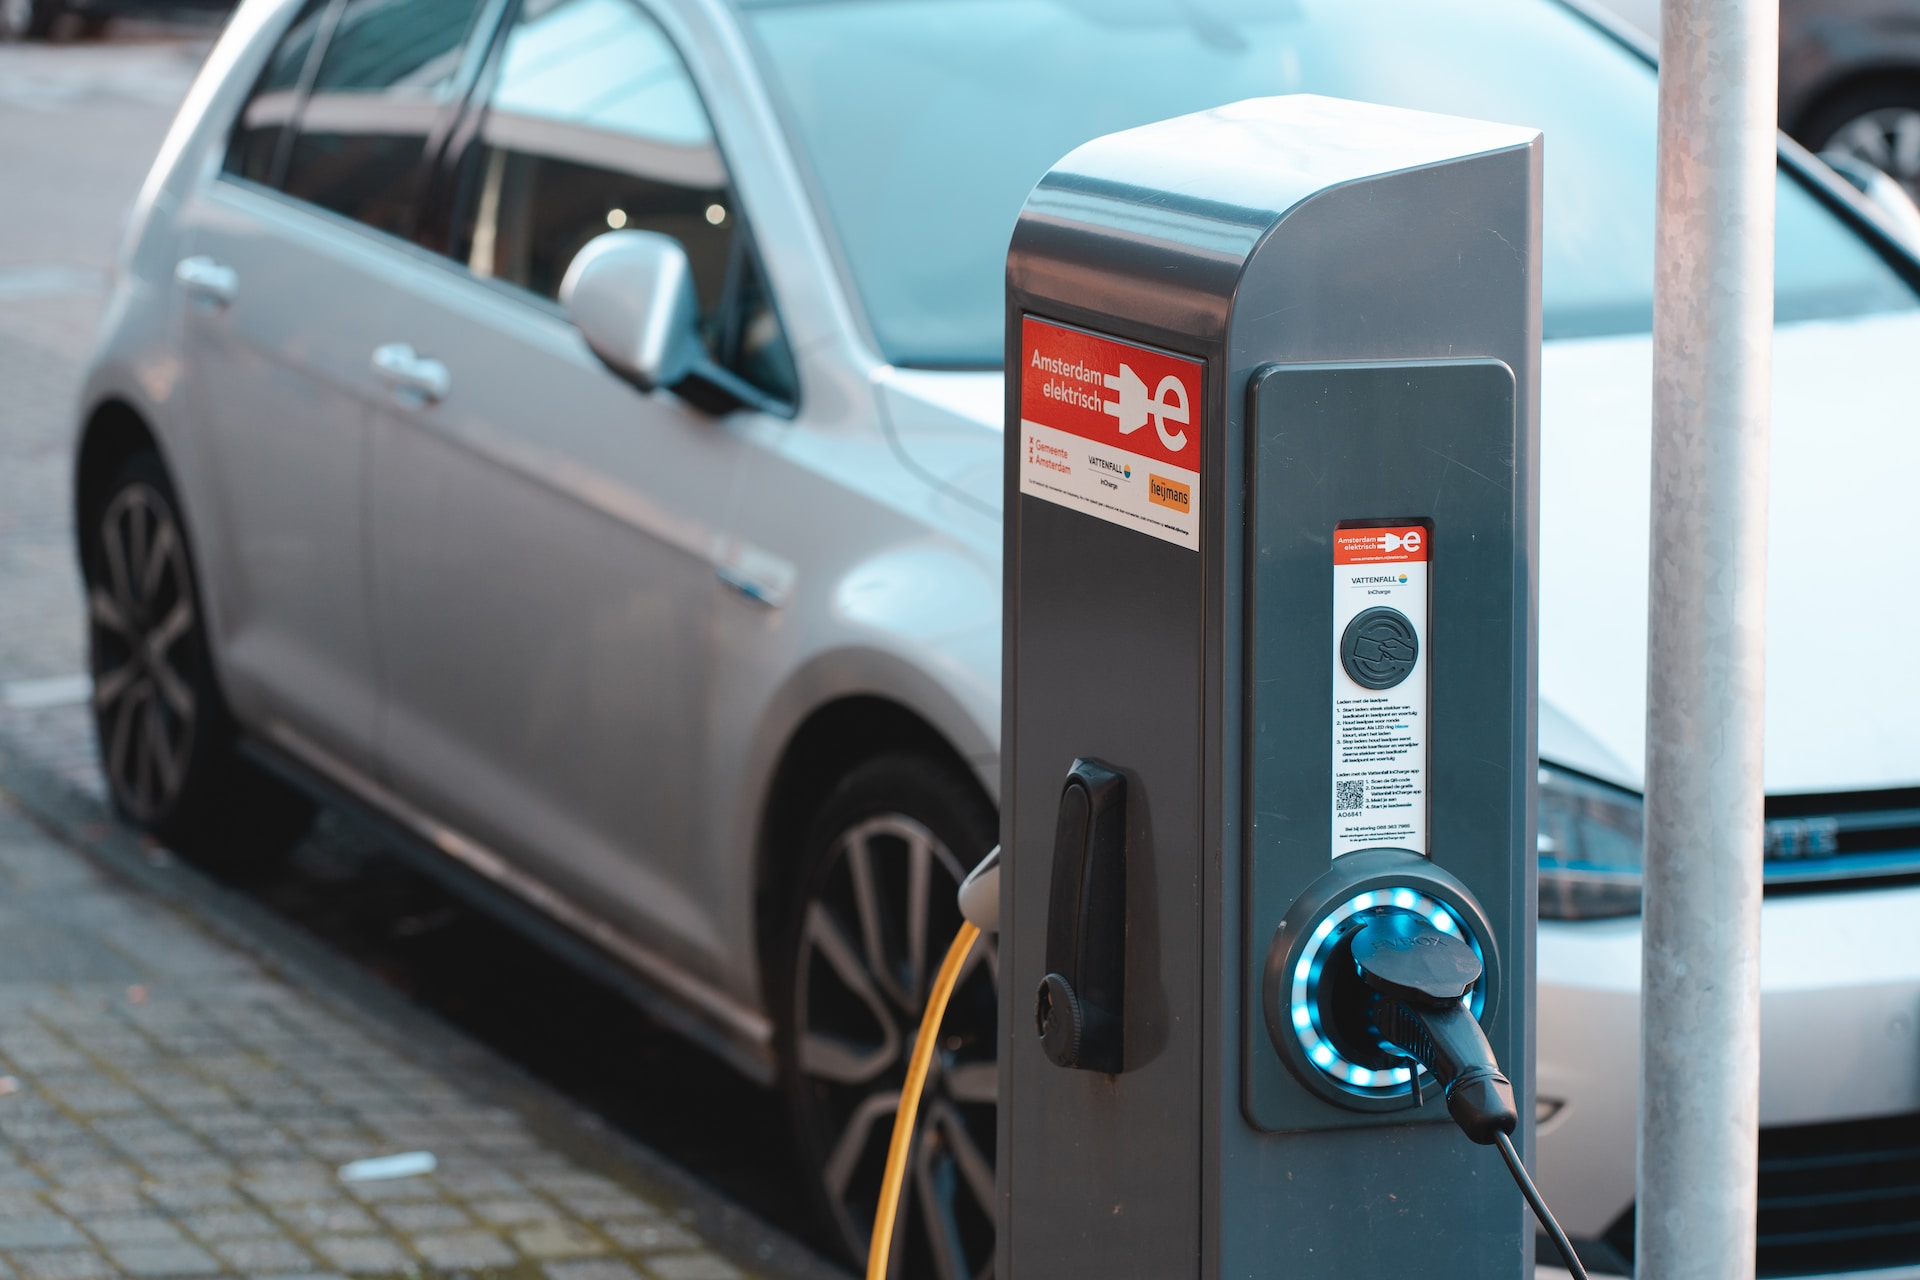 Landesweit immer mehr E-Ladestationen / More and more e-charging stations nationwide